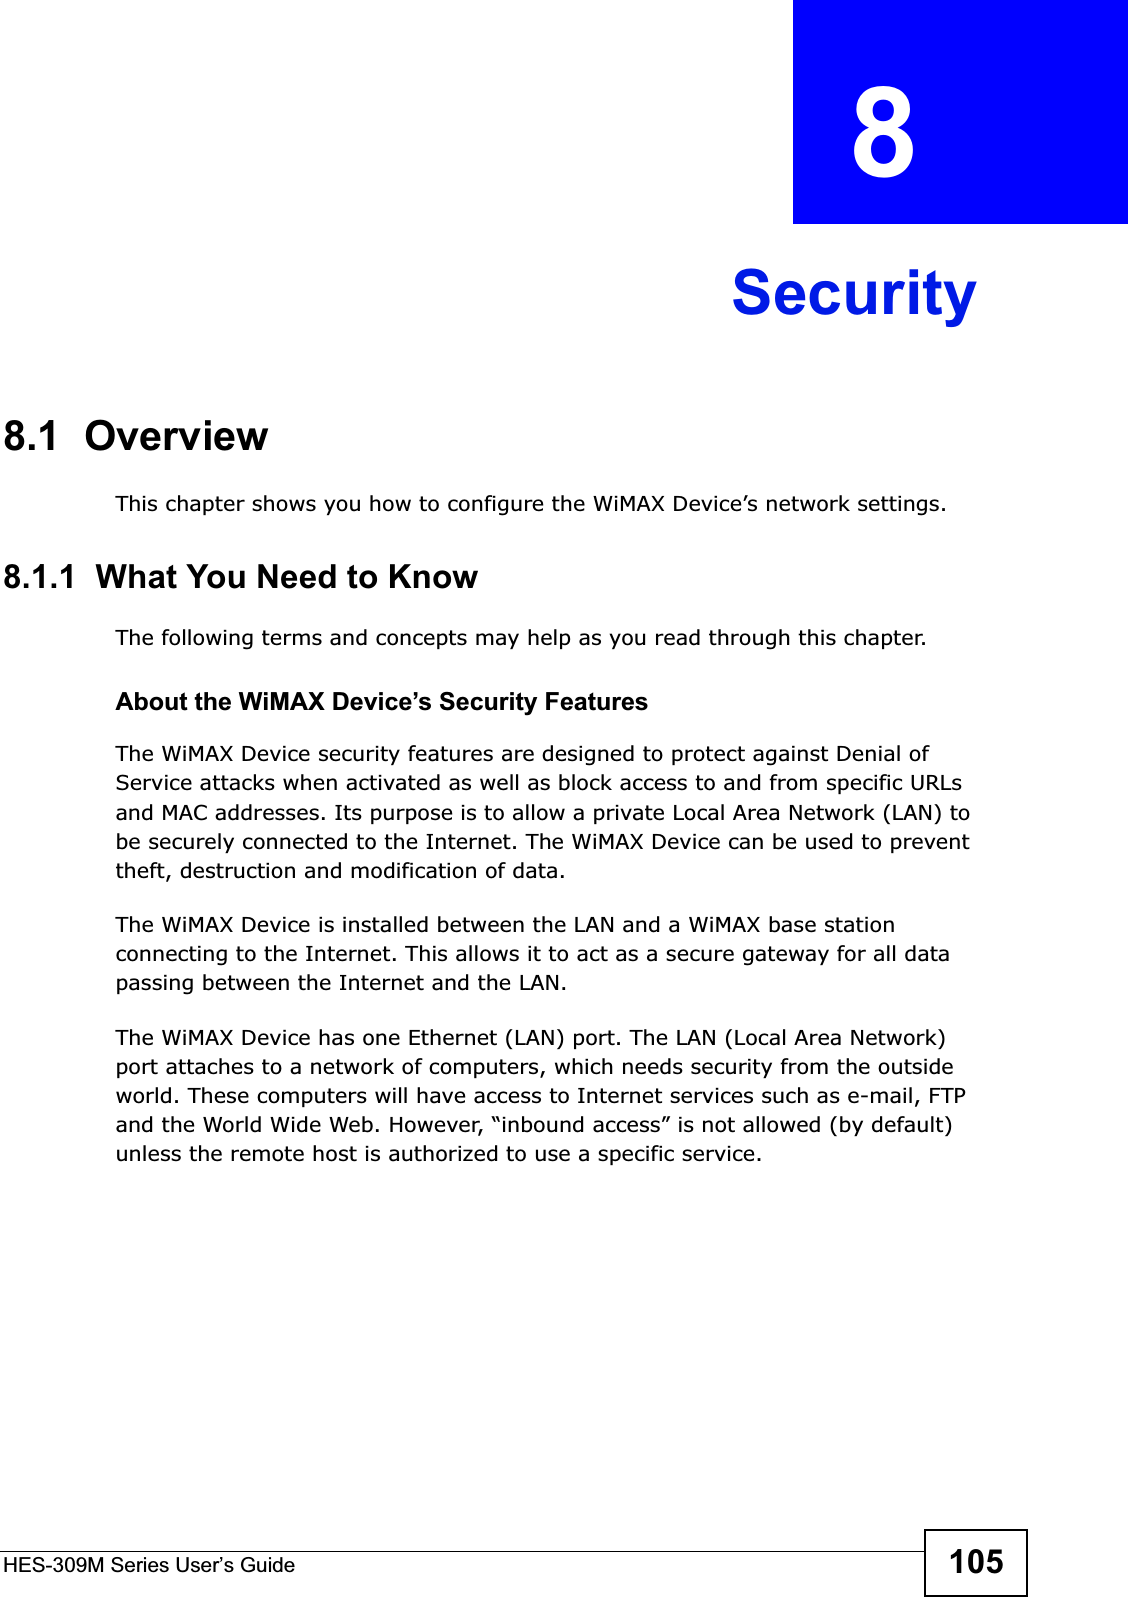 HES-309M Series User’s Guide 105CHAPTER  8 Security8.1  OverviewThis chapter shows you how to configure the WiMAX Device’s network settings.8.1.1  What You Need to KnowThe following terms and concepts may help as you read through this chapter.About the WiMAX Device’s Security FeaturesThe WiMAX Device security features are designed to protect against Denial of Service attacks when activated as well as block access to and from specific URLs and MAC addresses. Its purpose is to allow a private Local Area Network (LAN) to be securely connected to the Internet. The WiMAX Device can be used to prevent theft, destruction and modification of data. The WiMAX Device is installed between the LAN and a WiMAX base station connecting to the Internet. This allows it to act as a secure gateway for all data passing between the Internet and the LAN.The WiMAX Device has one Ethernet (LAN) port. The LAN (Local Area Network) port attaches to a network of computers, which needs security from the outside world. These computers will have access to Internet services such as e-mail, FTP and the World Wide Web. However, “inbound access” is not allowed (by default) unless the remote host is authorized to use a specific service.